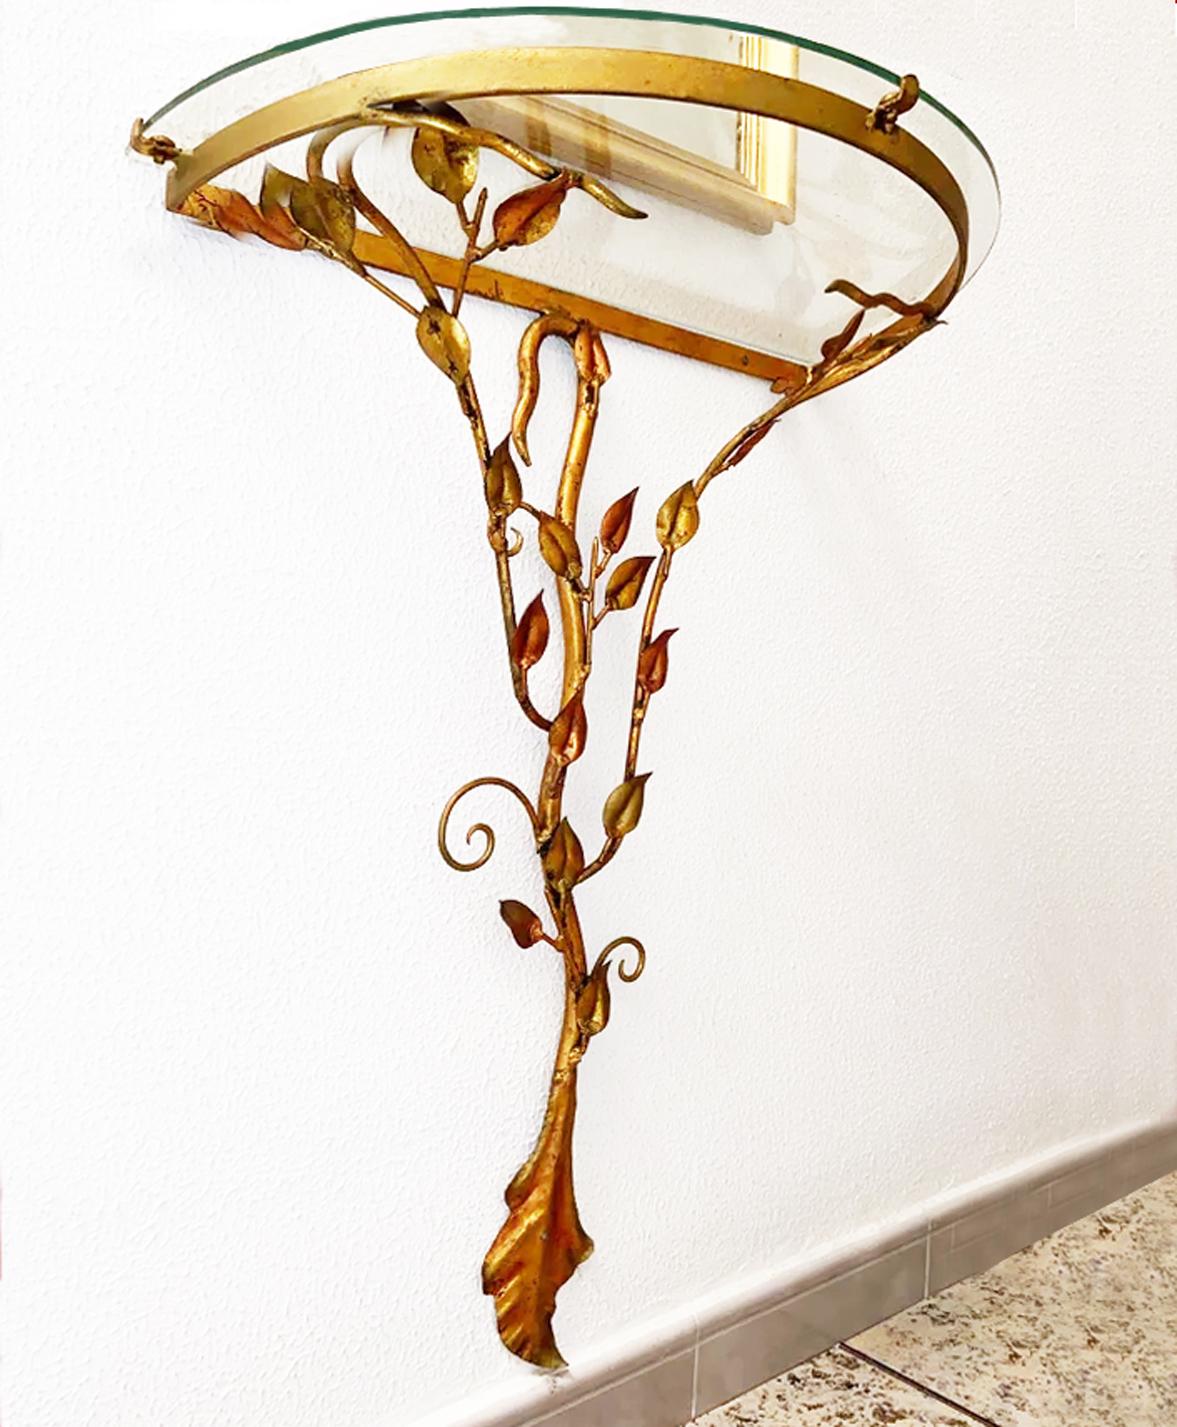 Wall Mount Console Table Mid Century Iron Leaves Gold Leaf, France 50s to 70s
Nothing common, this beautiful console is very light and attractive
A matching coat rack is available
Hollewood Regency.
iton forged 
Mid 20th Century Furniture.
Posible